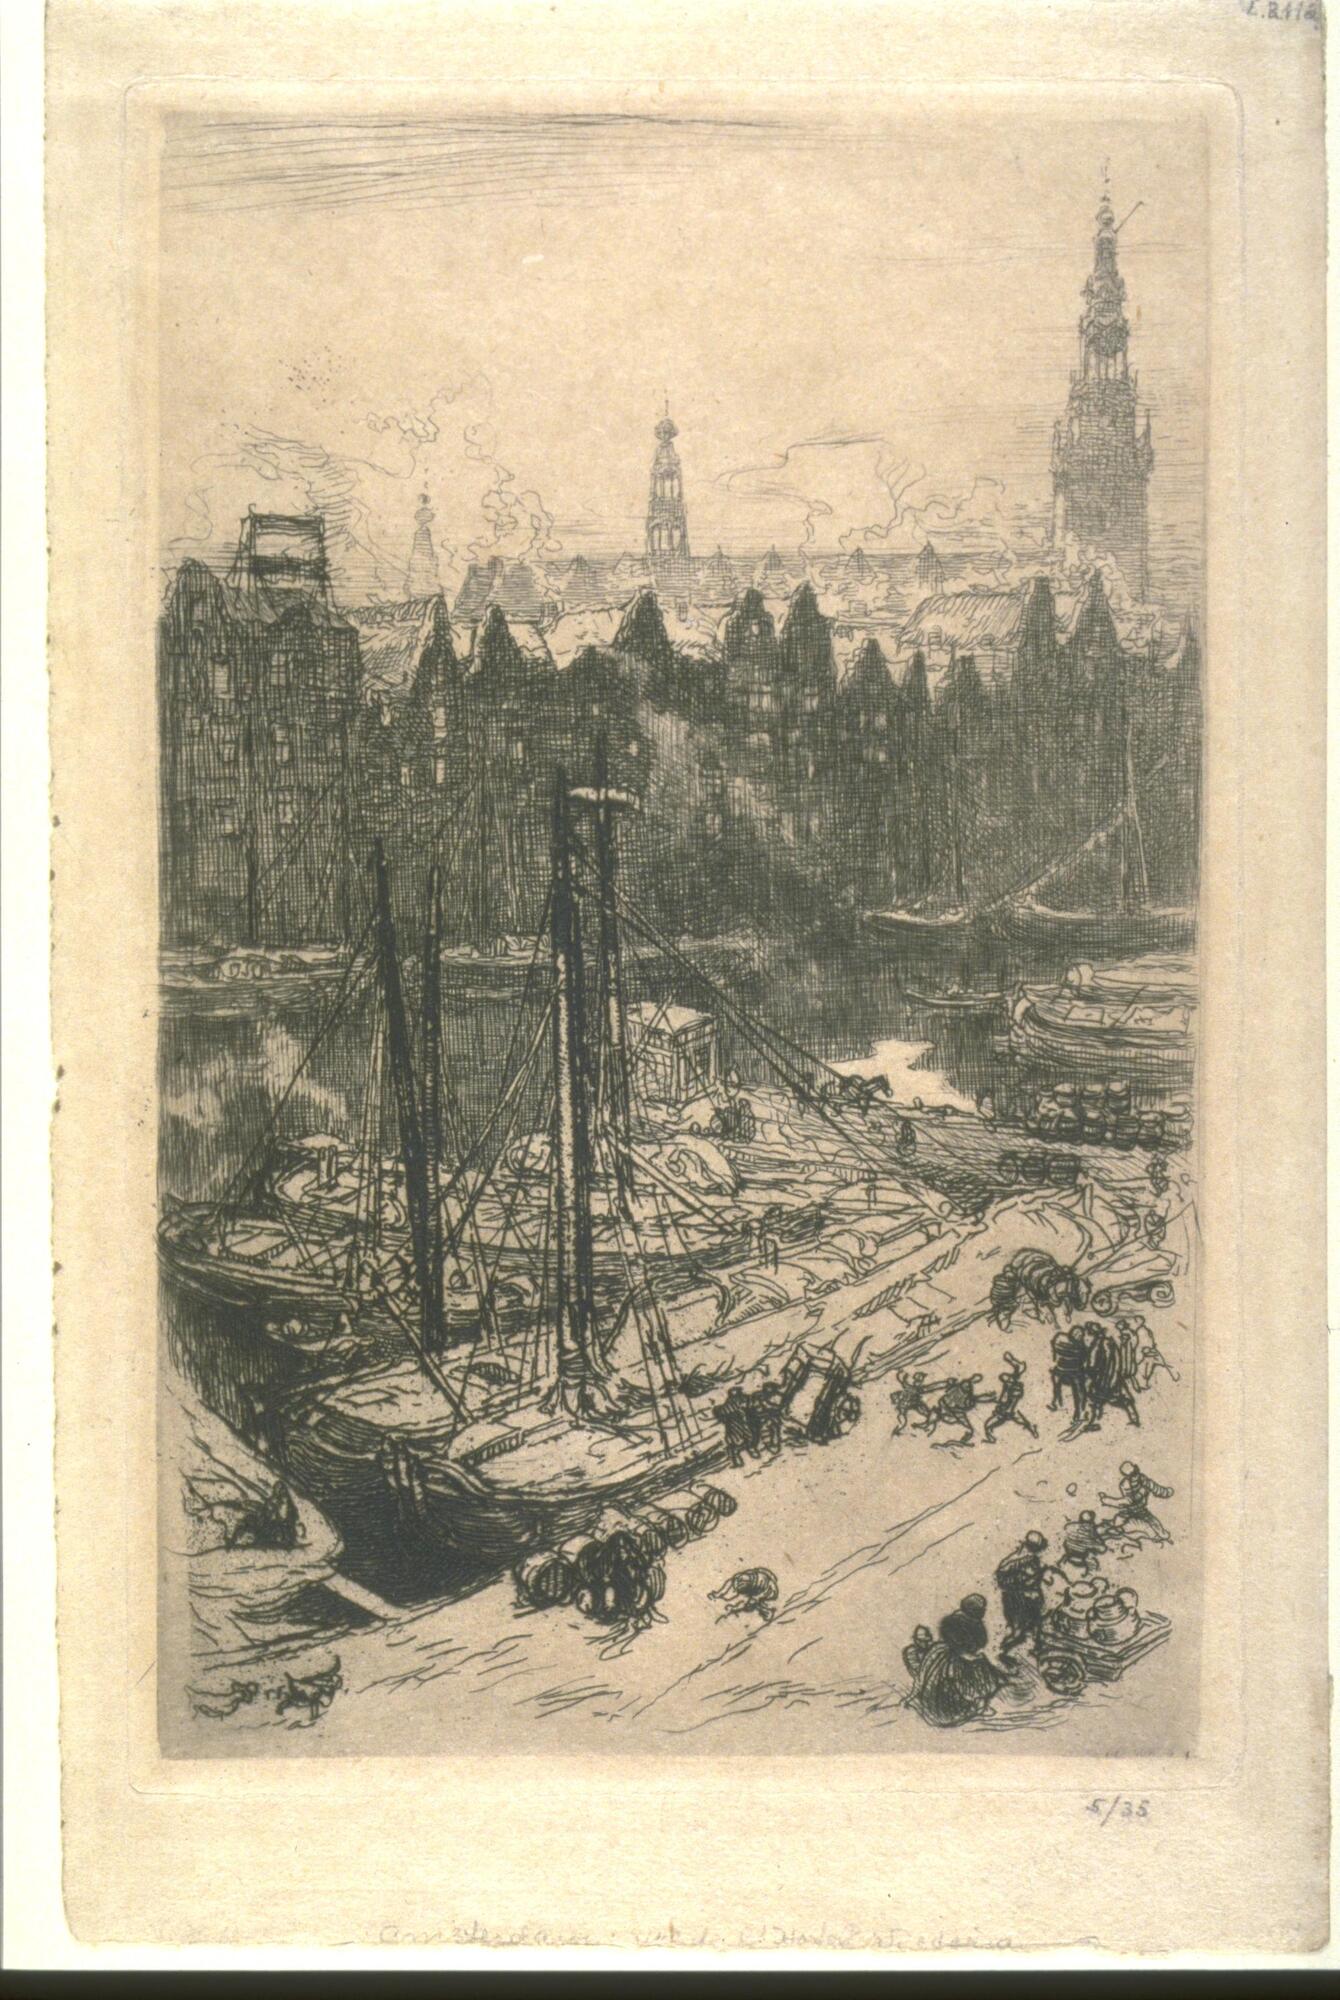 In the right foreground, cutting across diagonally, is a pier with figures moving around. At the pier are some ships, and in the middle ground is a strip of water and a row of darkly shadowed buildings. In the background are some faint towers that jut into the sky.